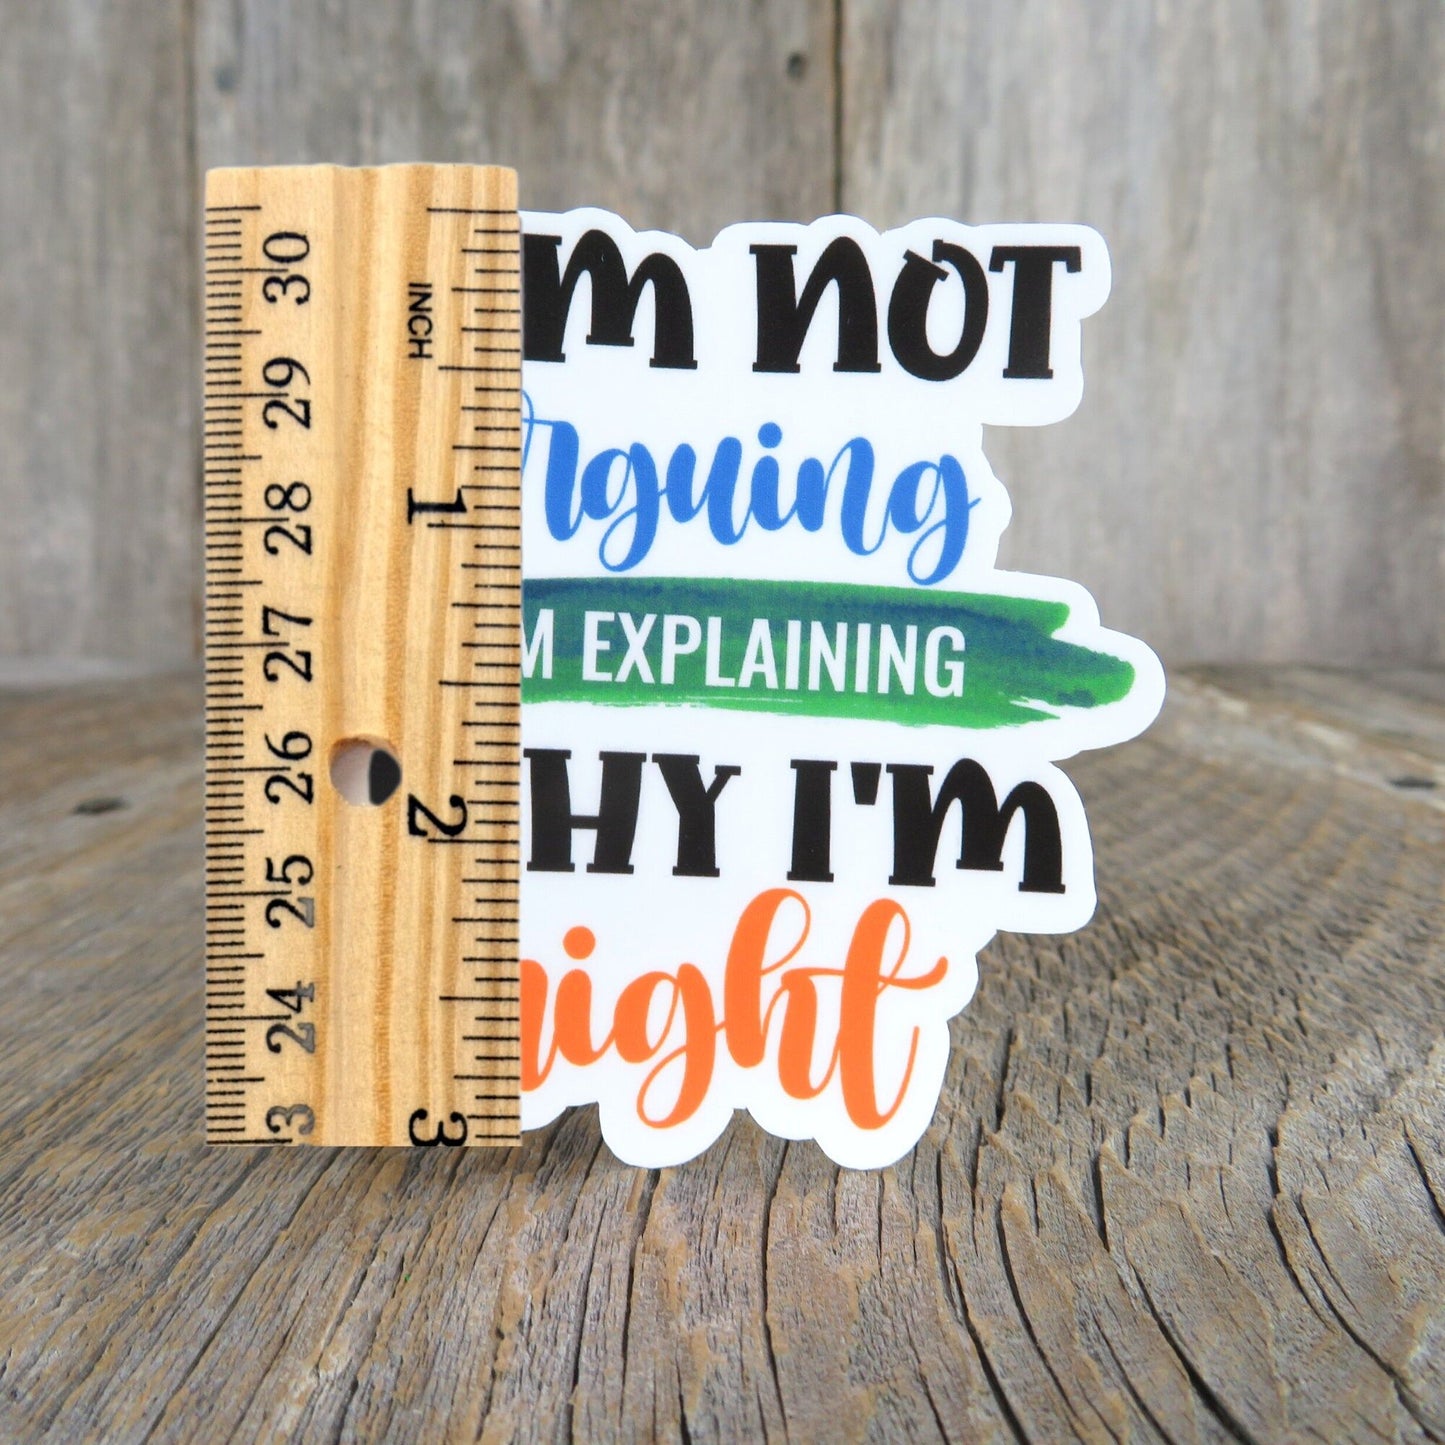 I'm Not Arguing I'm Explaining Why I am Right Sticker Full Color Social Funny Sarcastic Outspoken Phrase Stickers